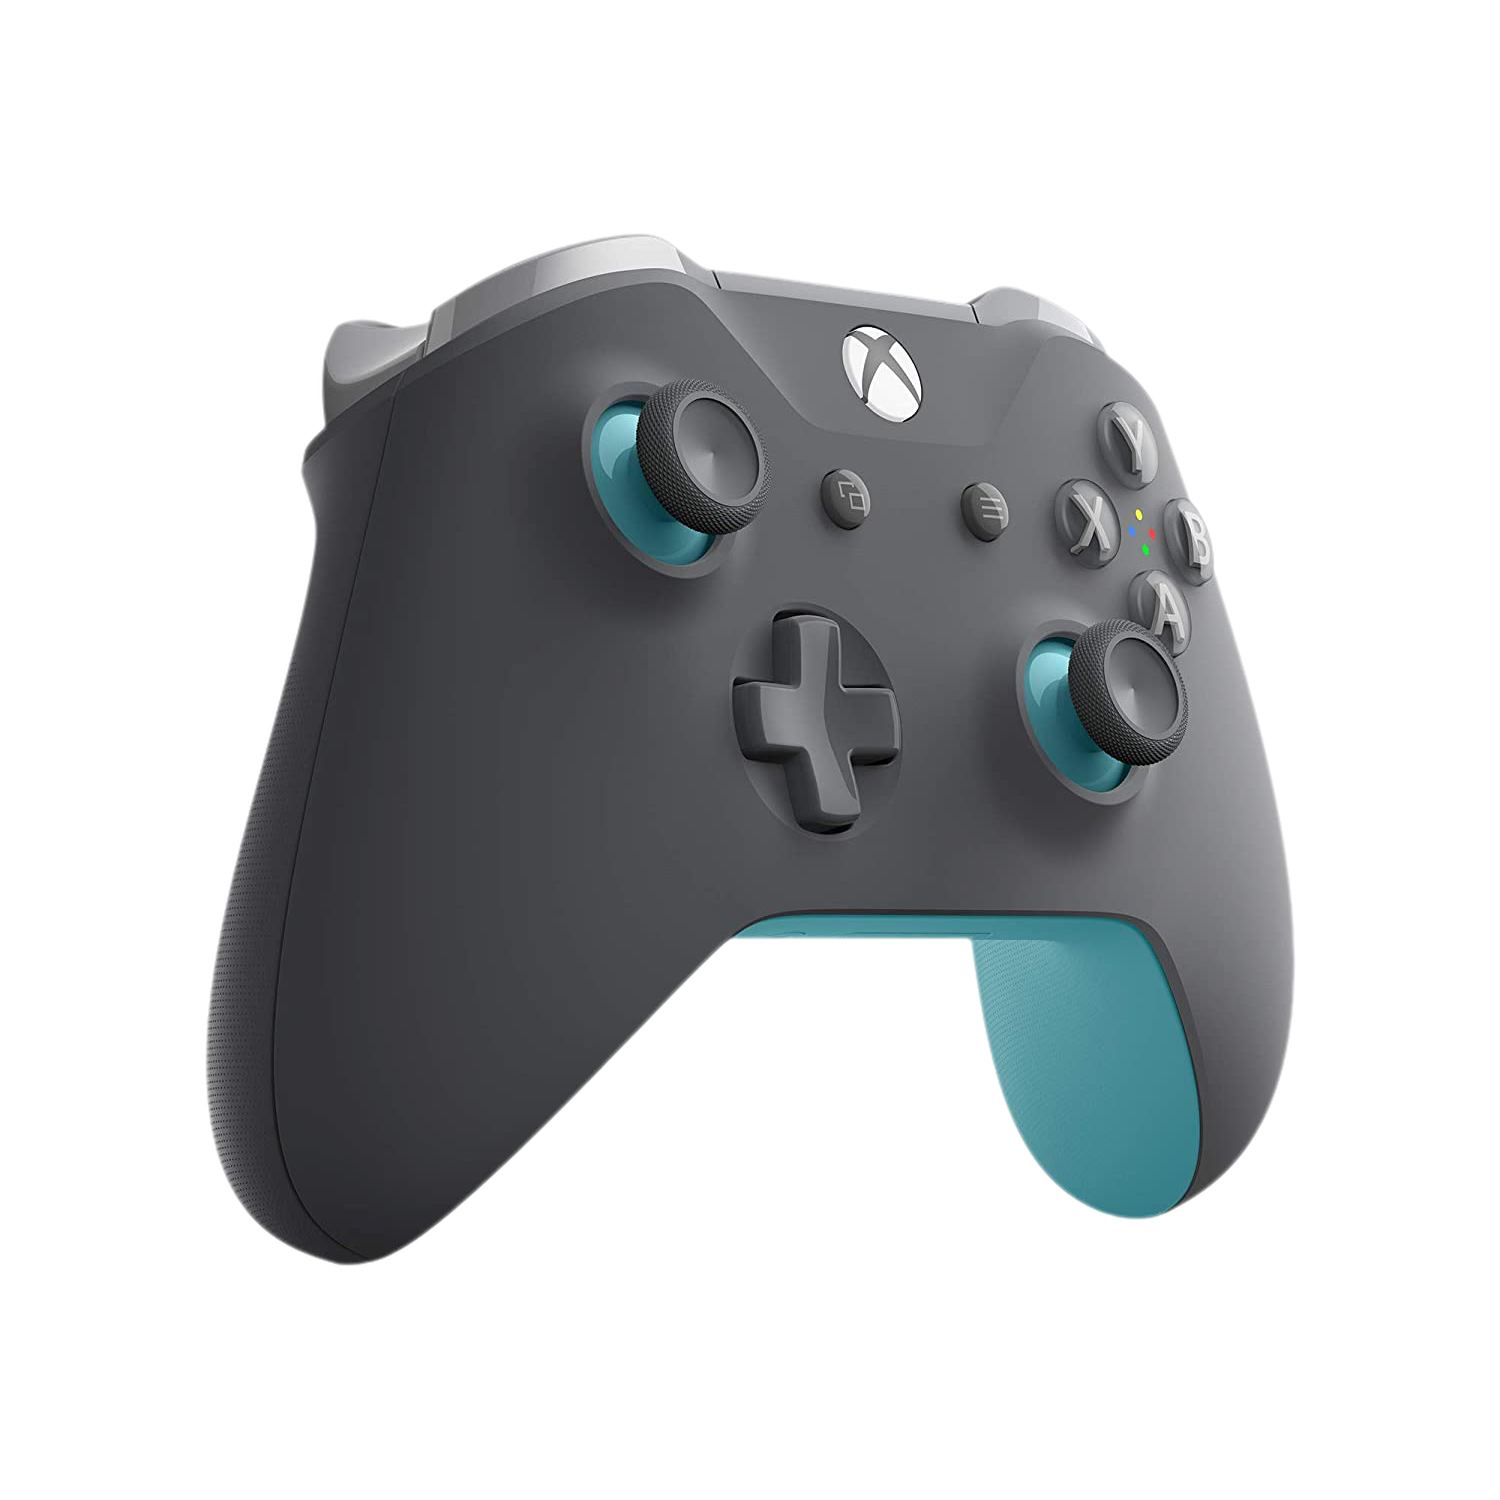 Microsoft-Official-Xbox-Controller-GreyBlue-Special-Edition-12-Months-Warranty